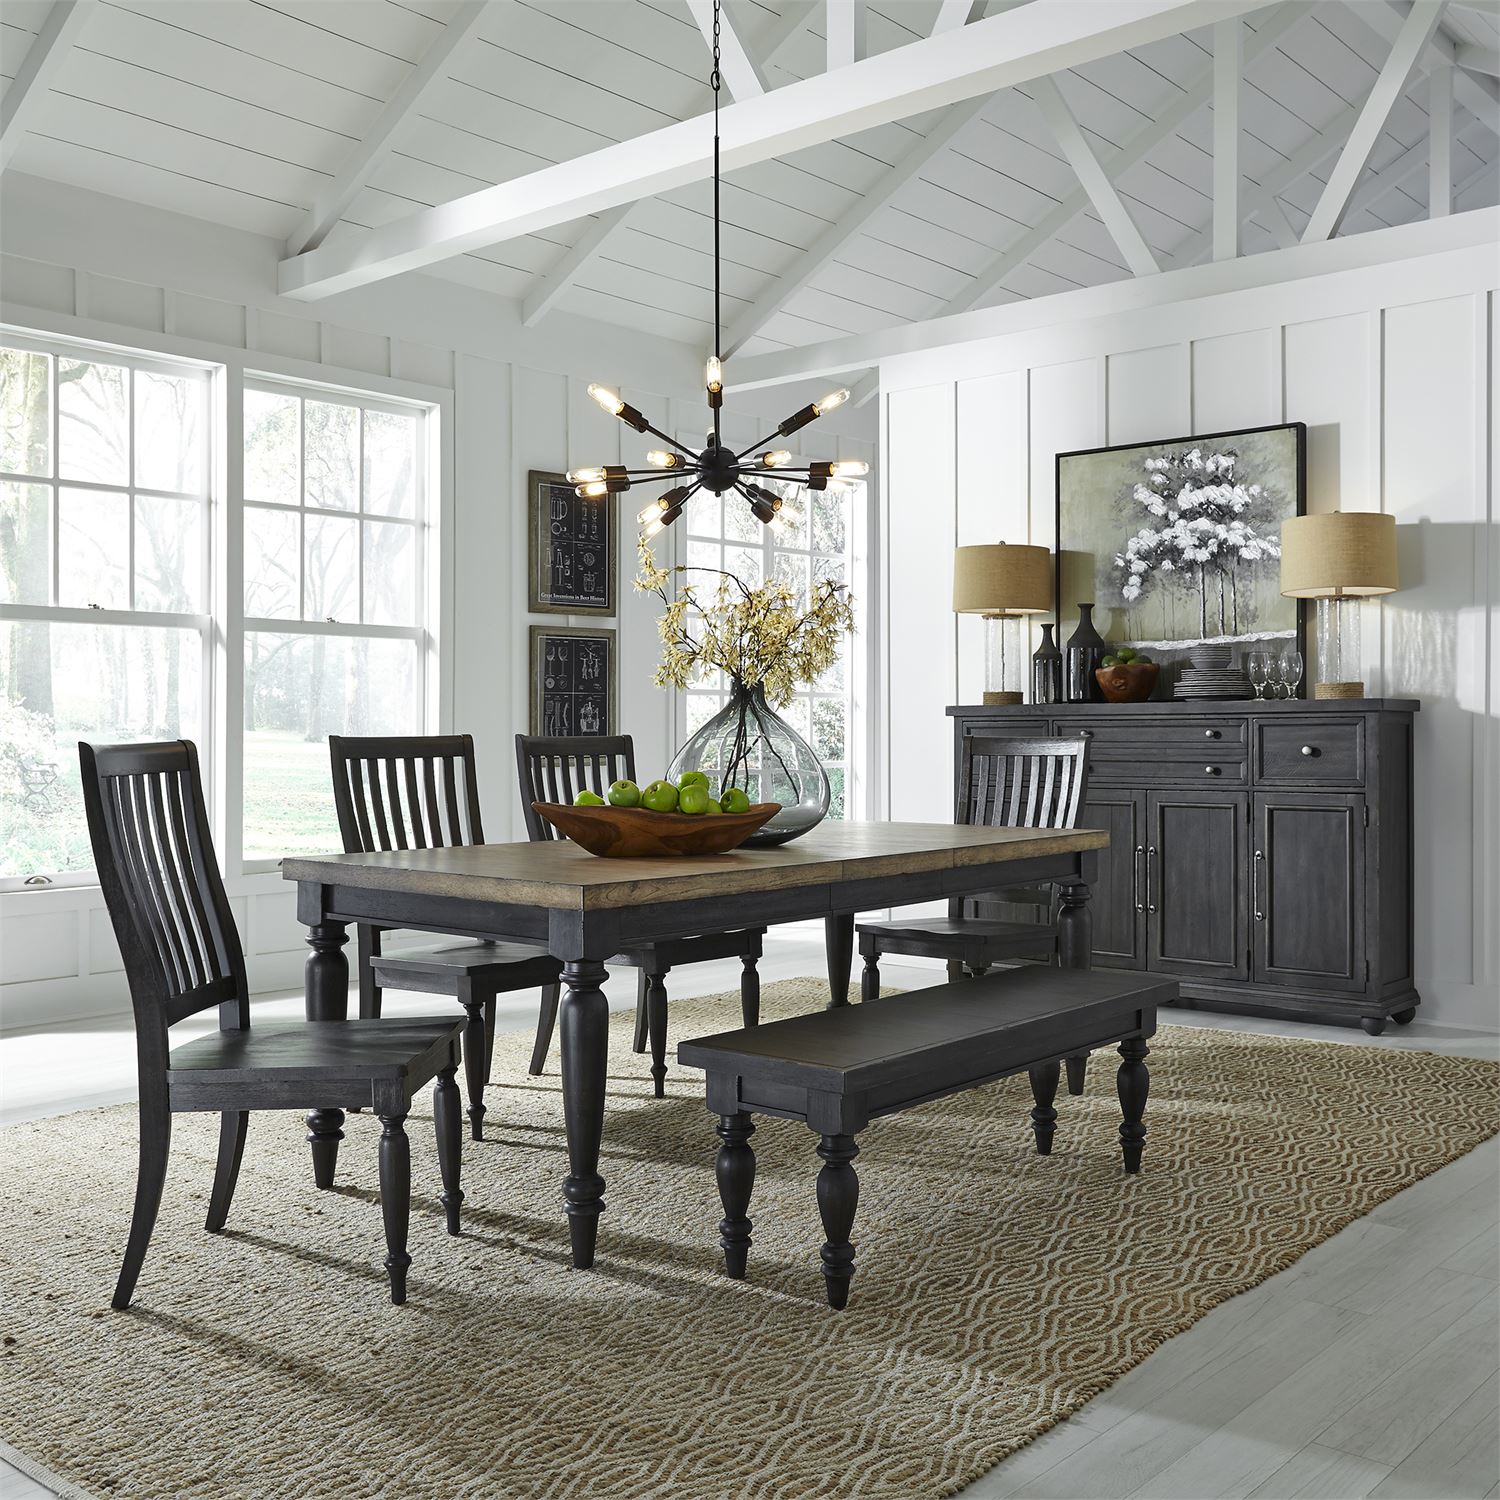 6 piece dining room set in Chalkboard Finish with Brownstone Top